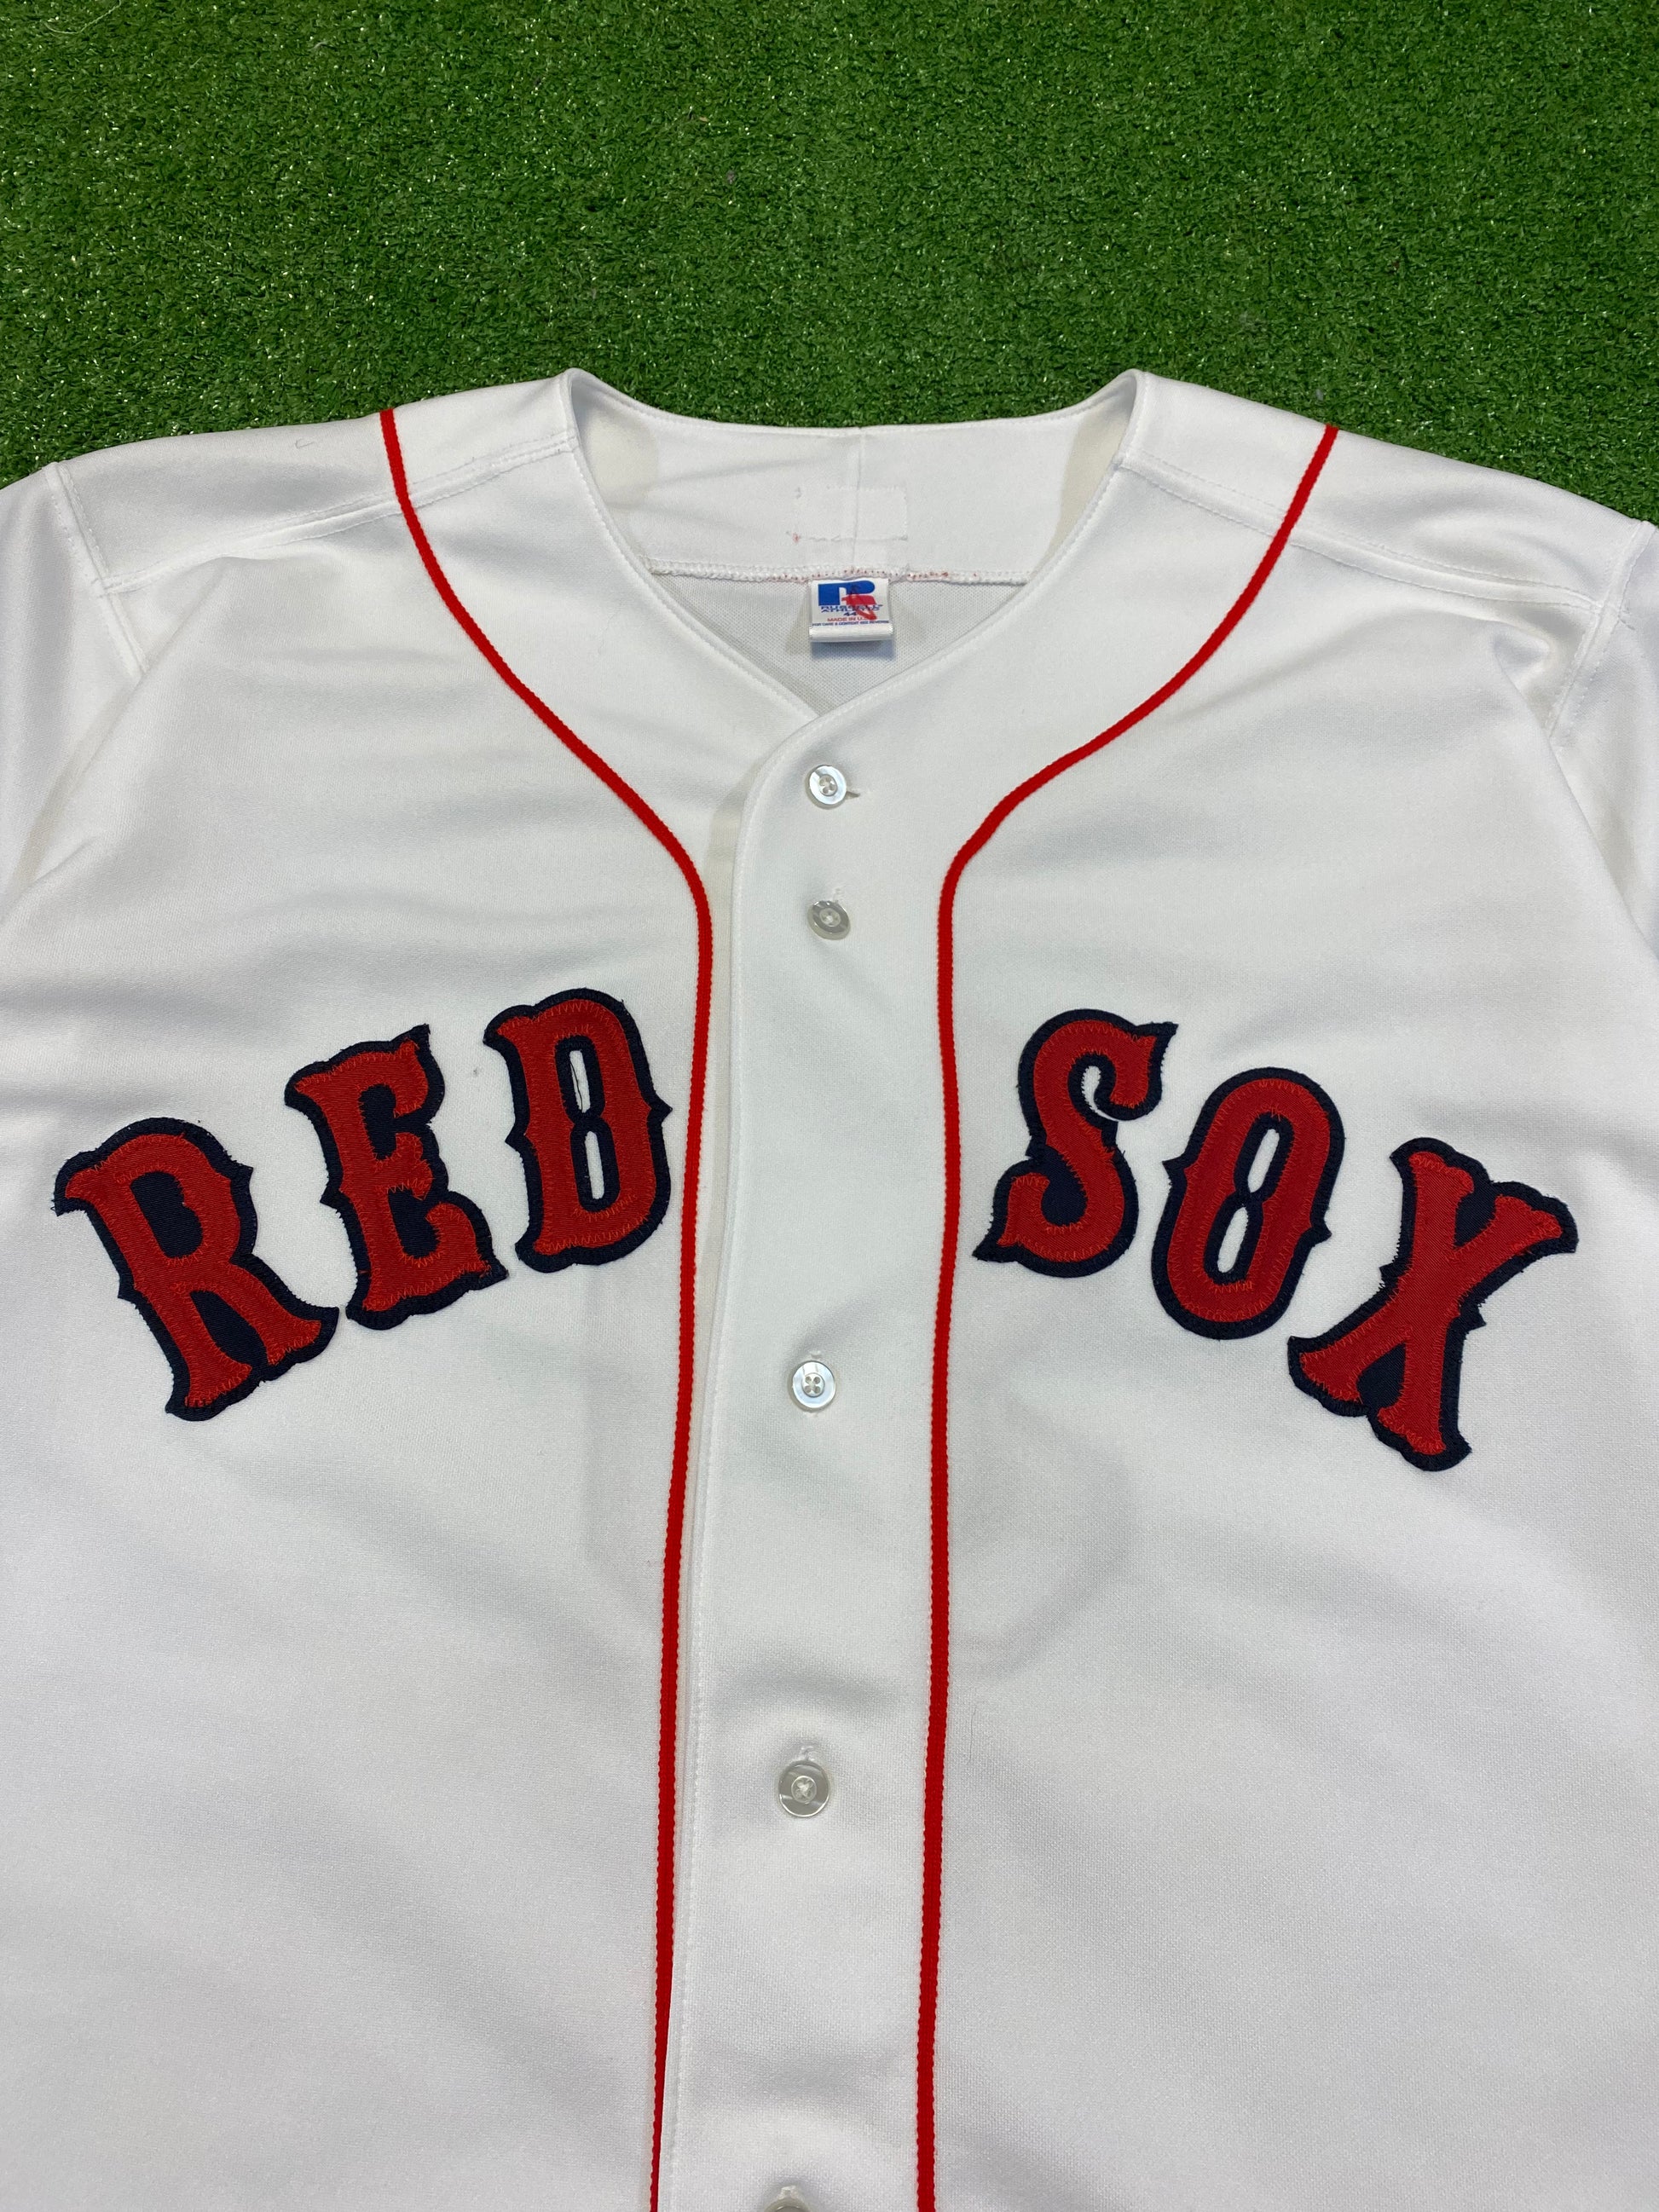 Boston Red Sox jersey worn by Ted Williams in 1946 sells for